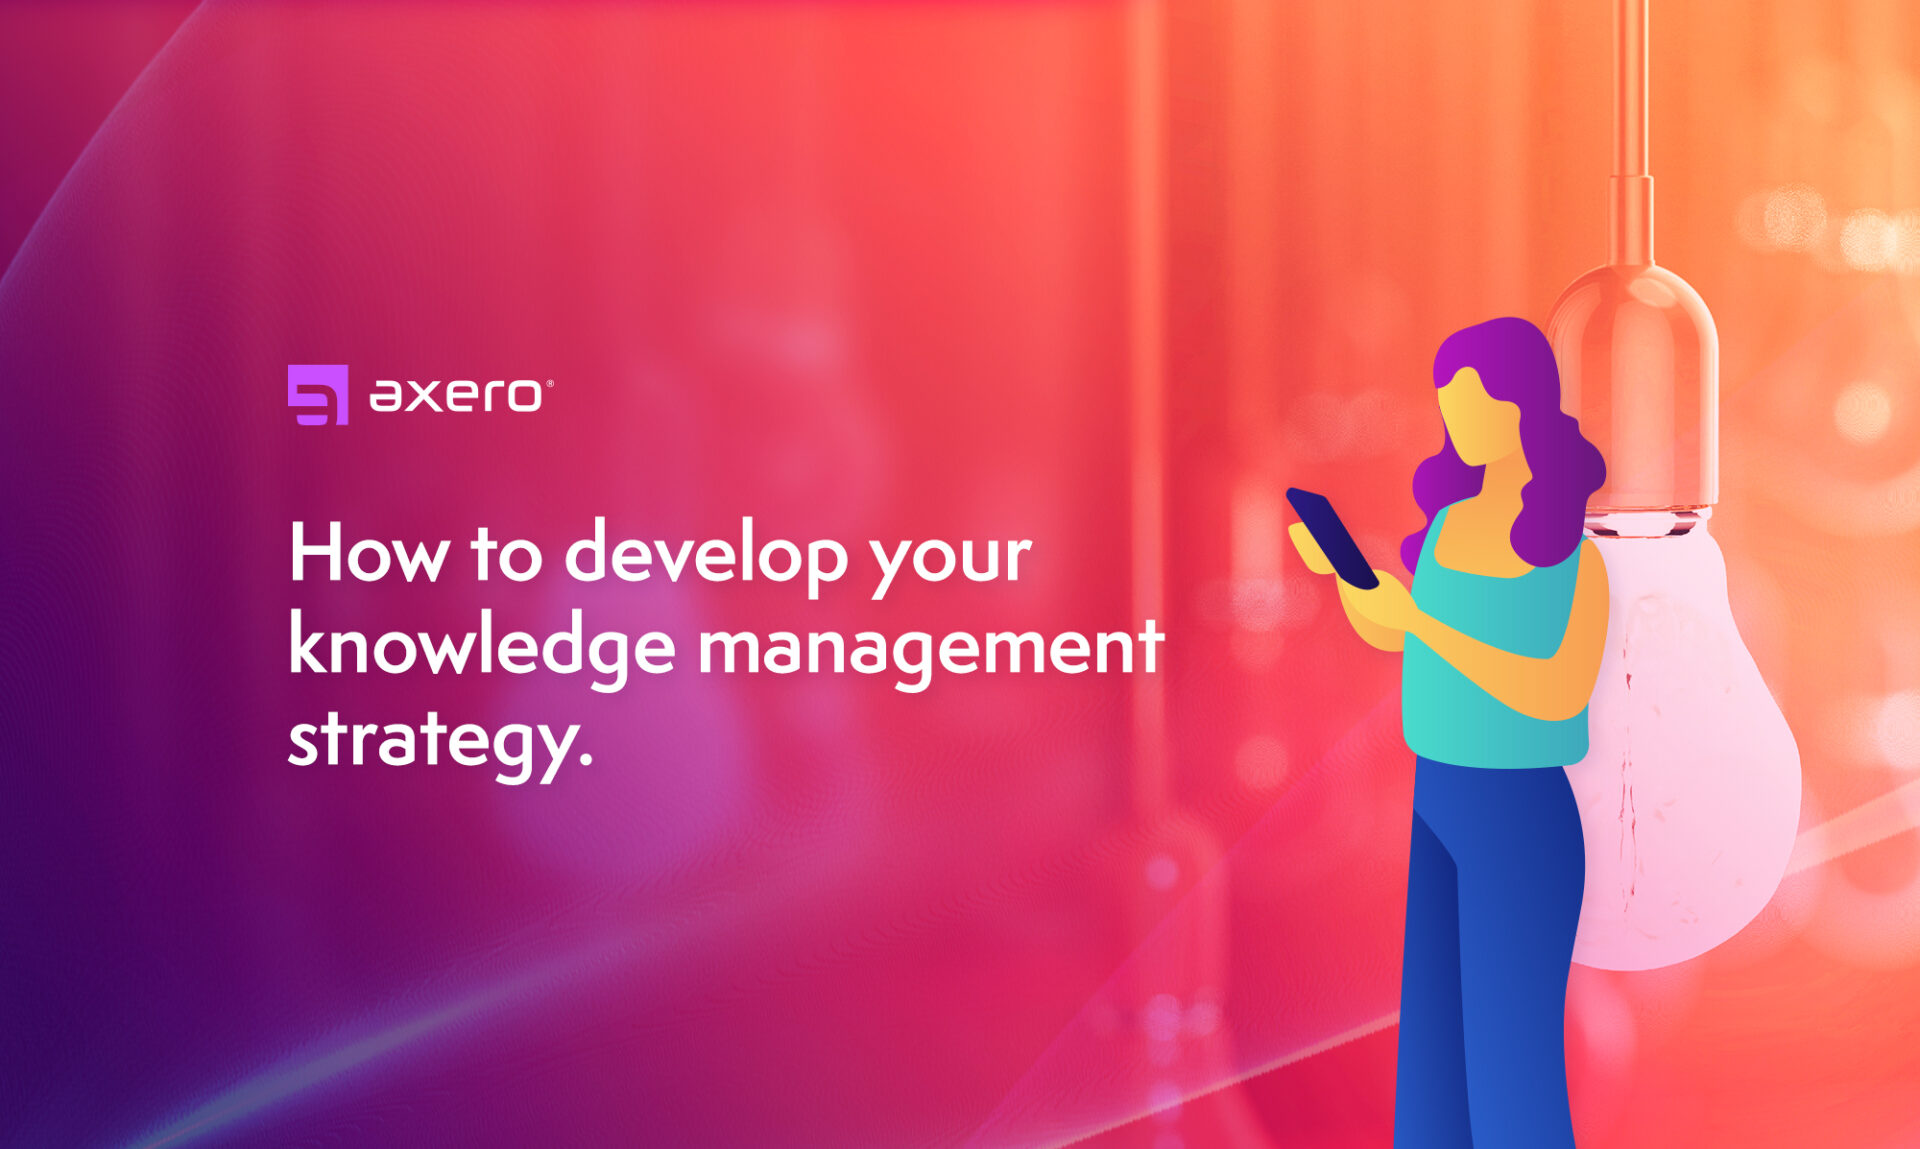 7 Simple Tips to Develop an Effective Knowledge Management Strategy